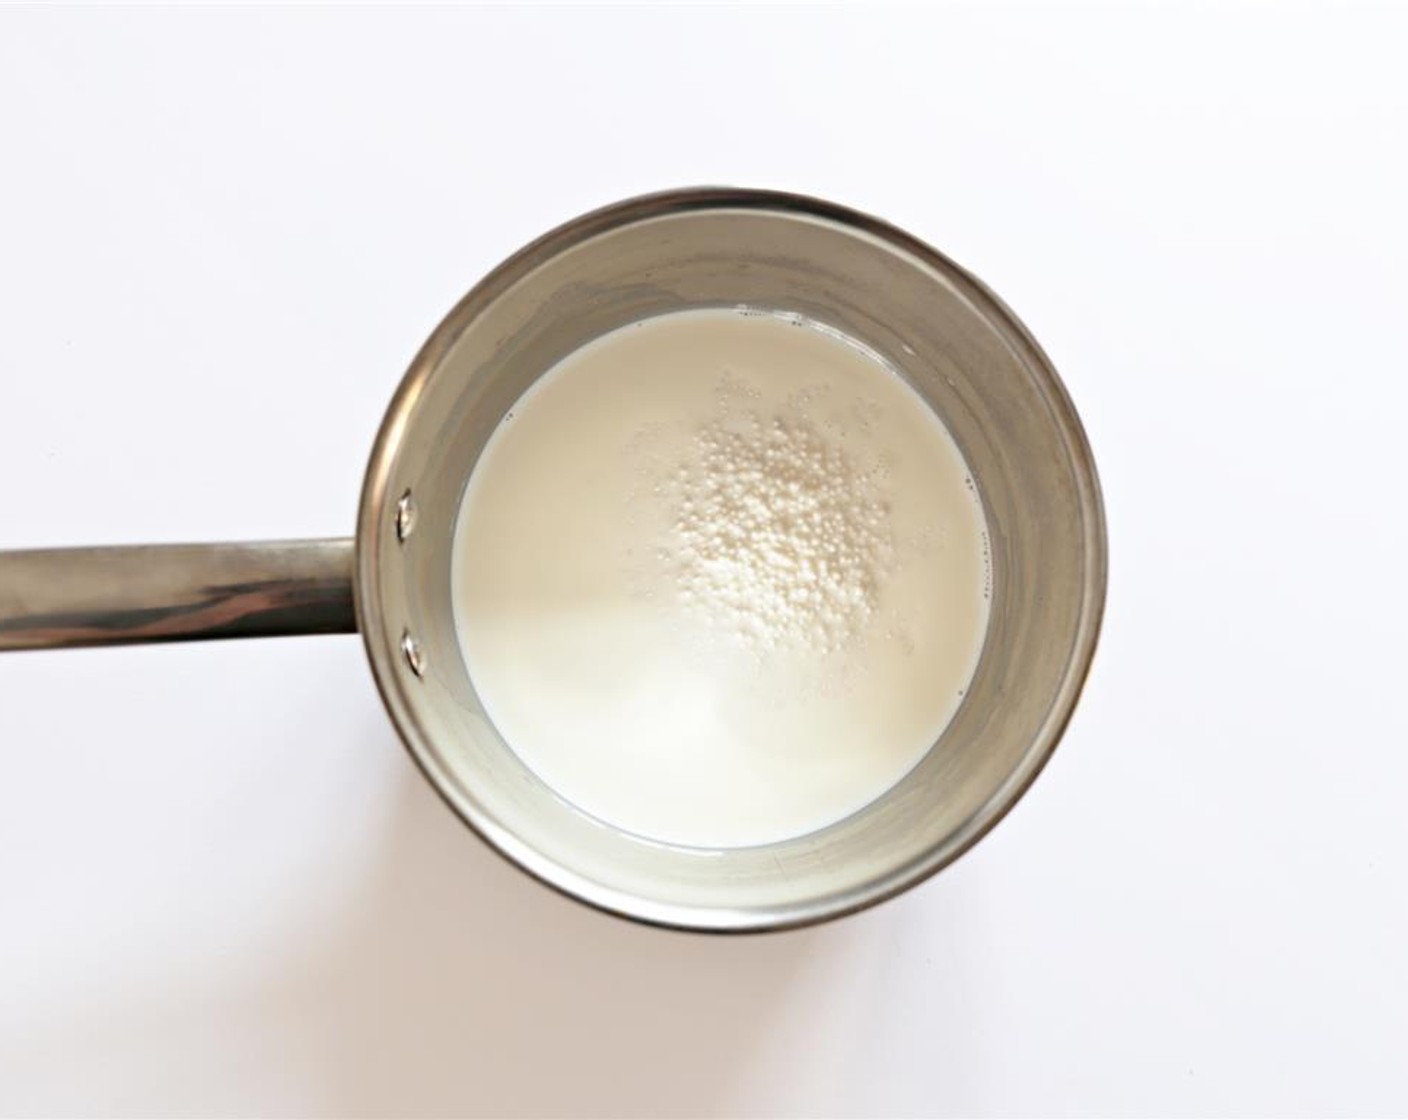 step 1 In a medium pan, combine the Tapioca Pearls (1/3 cup) and Milk (1 cup). Leave the mixture to soak for 1 hour.